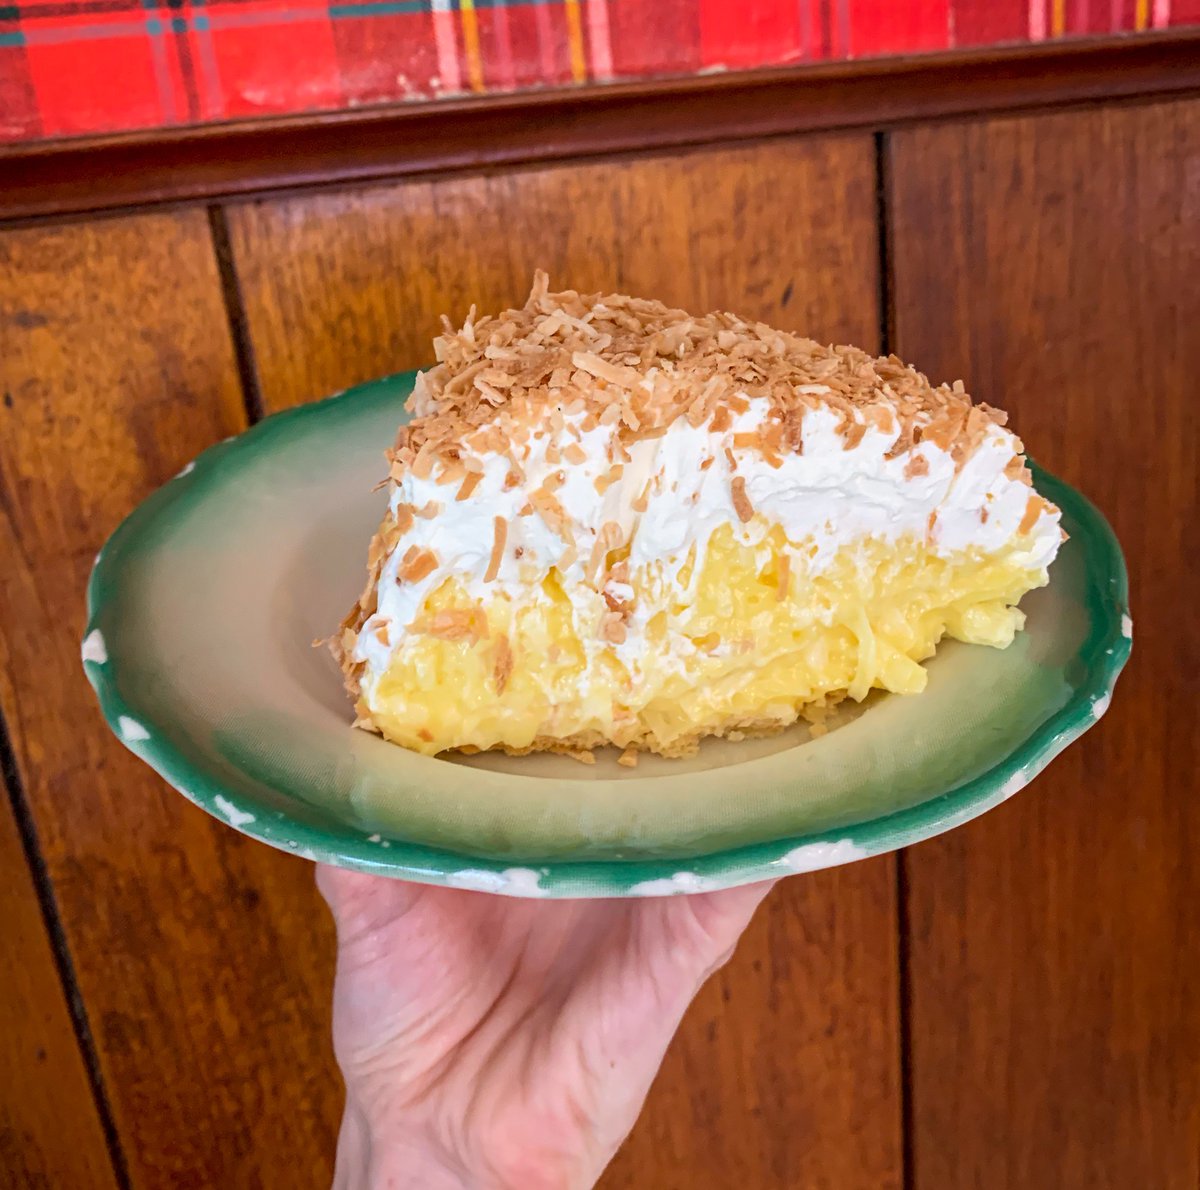 HAPPY COCONUT CREAM PIE DAY! Celebrate the best way we know how--with the best slice in town! 🥳 #coconut #coconutcreampie #nationalpieday #celebrate #nutsforcoconut #delicious